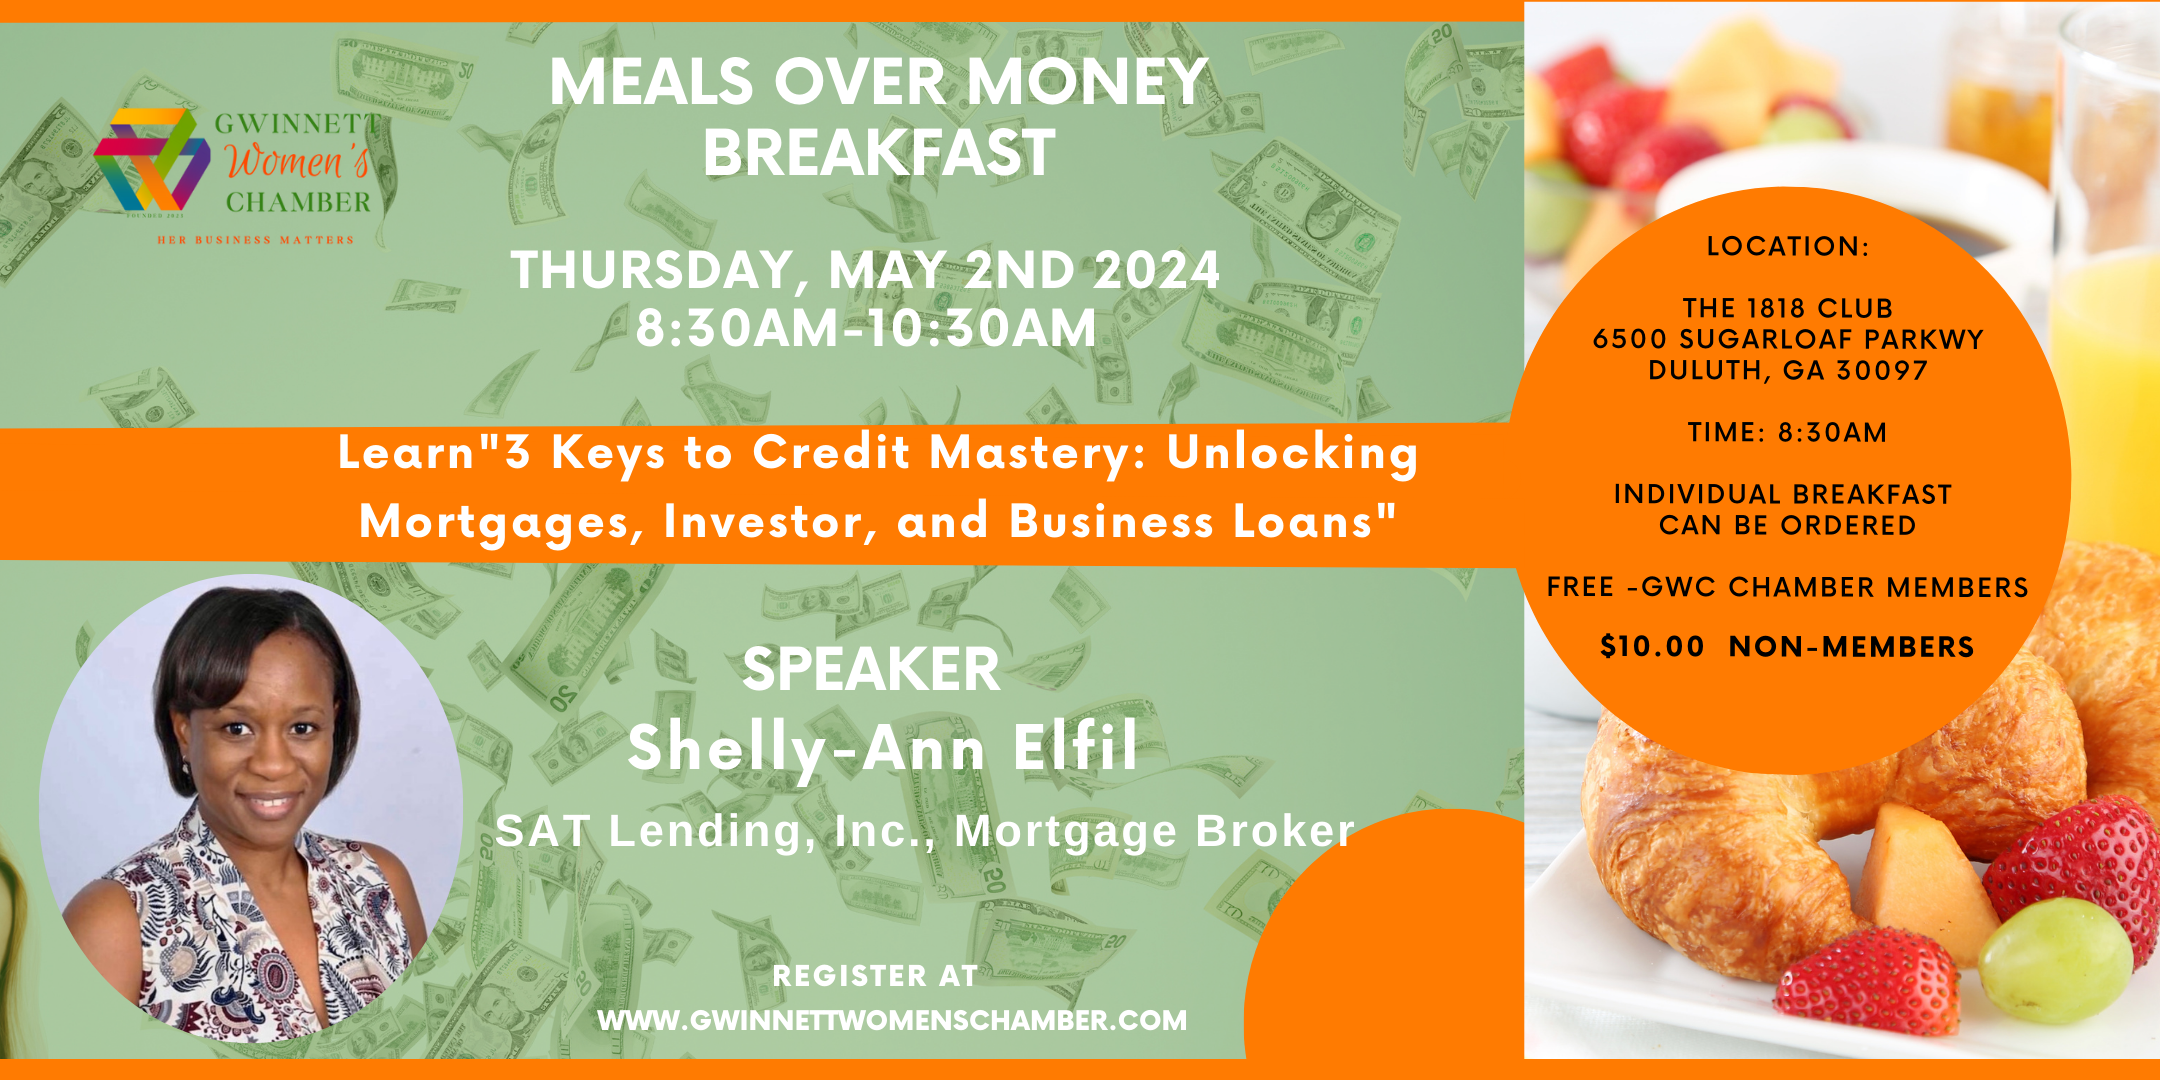 "3 Keys to Credit Mastery: Unlocking Mortgages, Investor, and Business Loans"